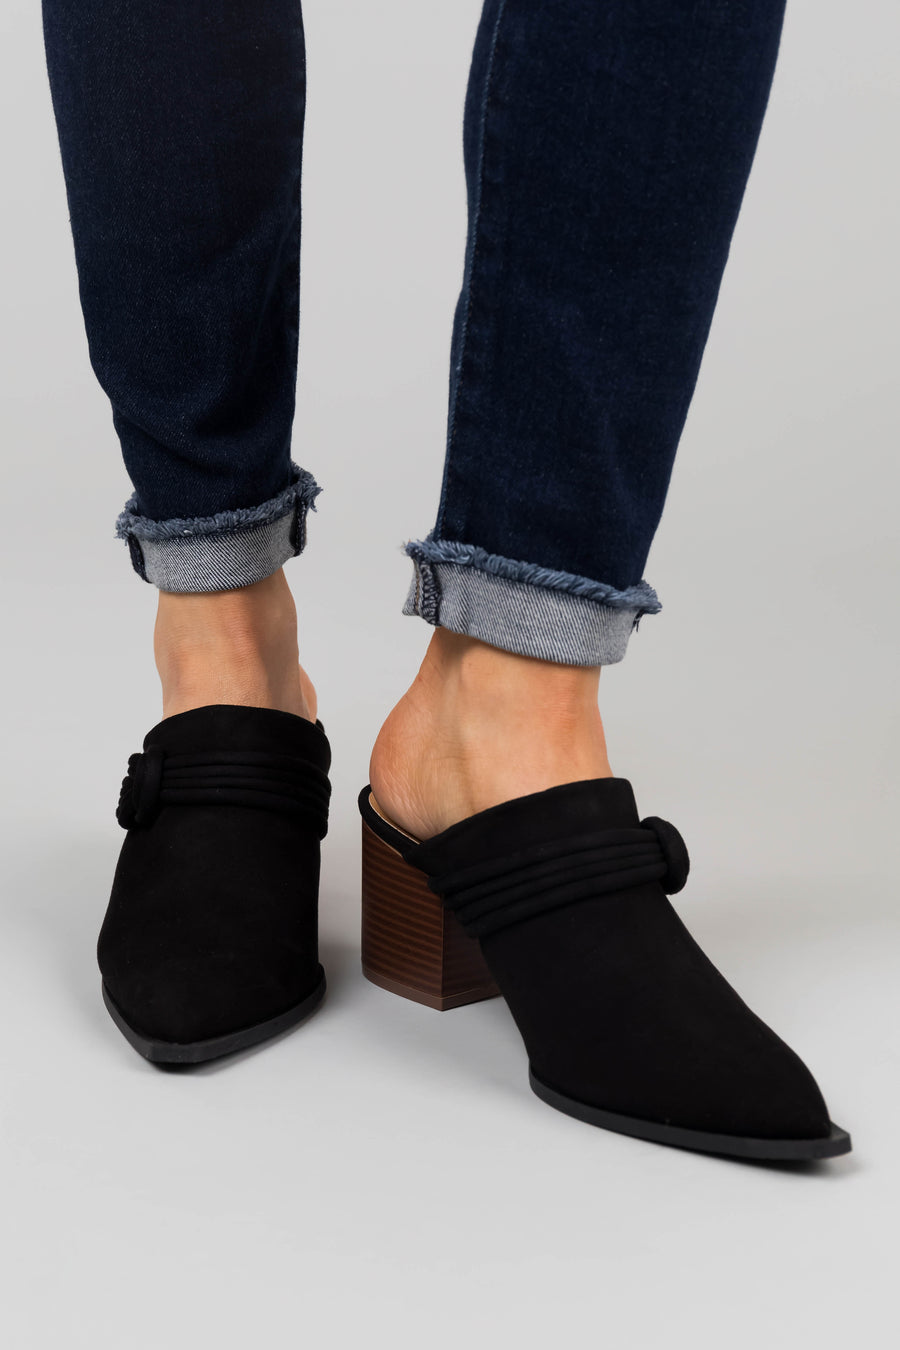 Black Faux Suede Pointed Toe Mules